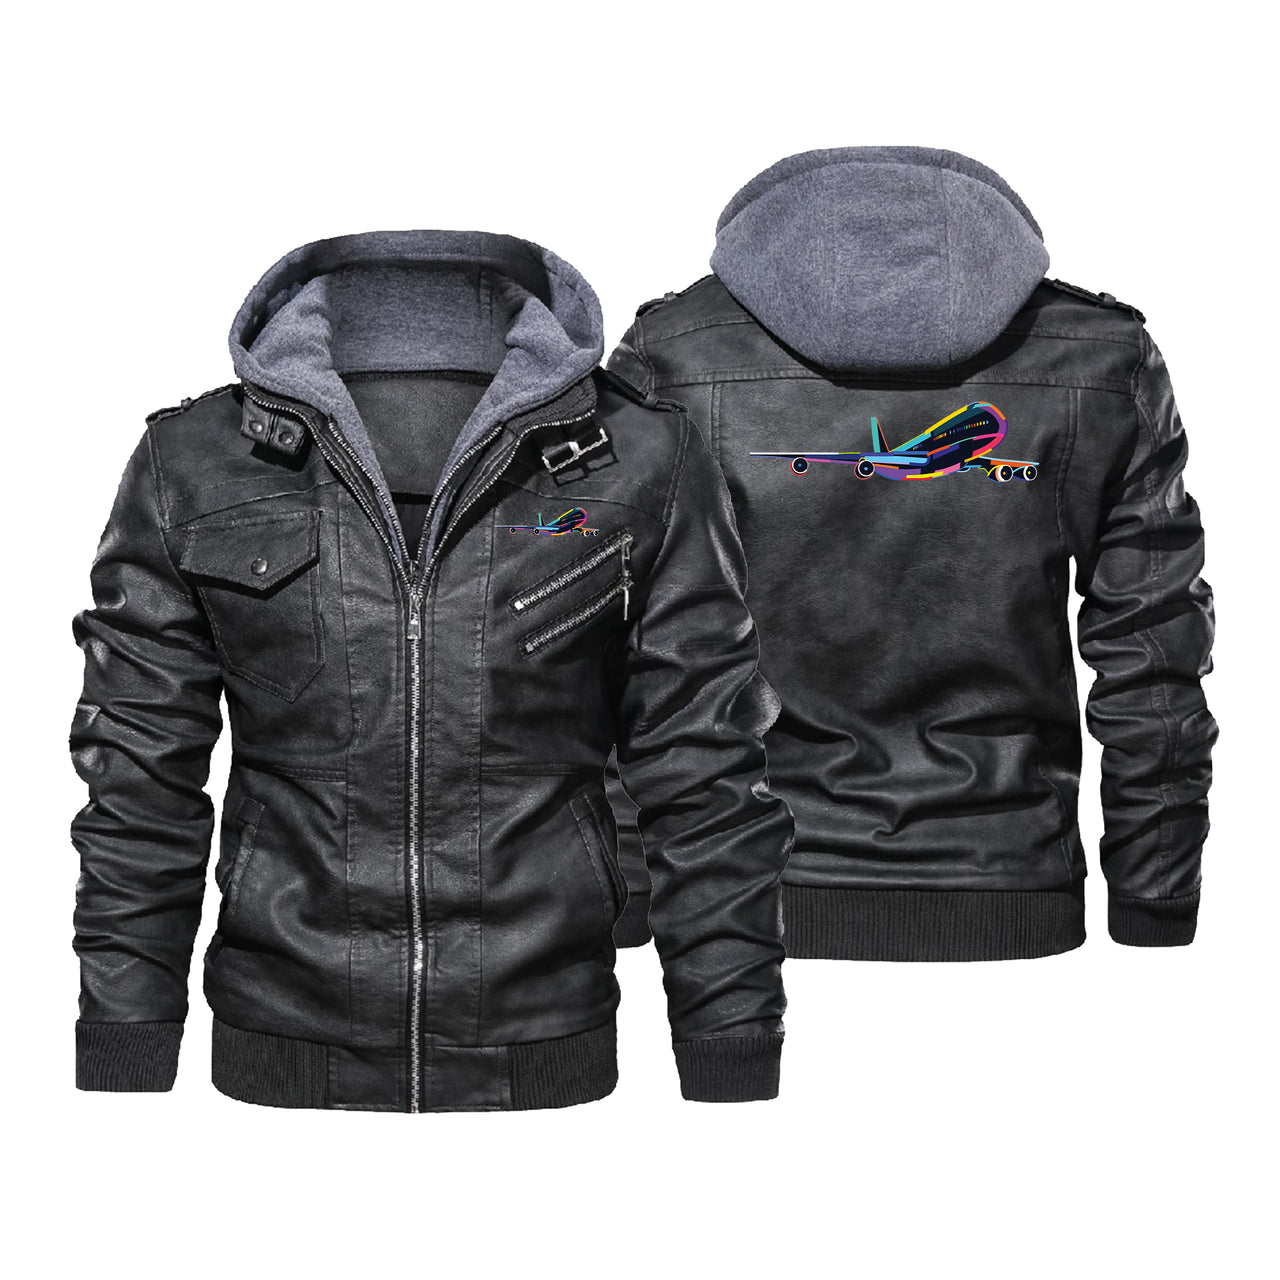 Multicolor Airplane Designed Hooded Leather Jackets